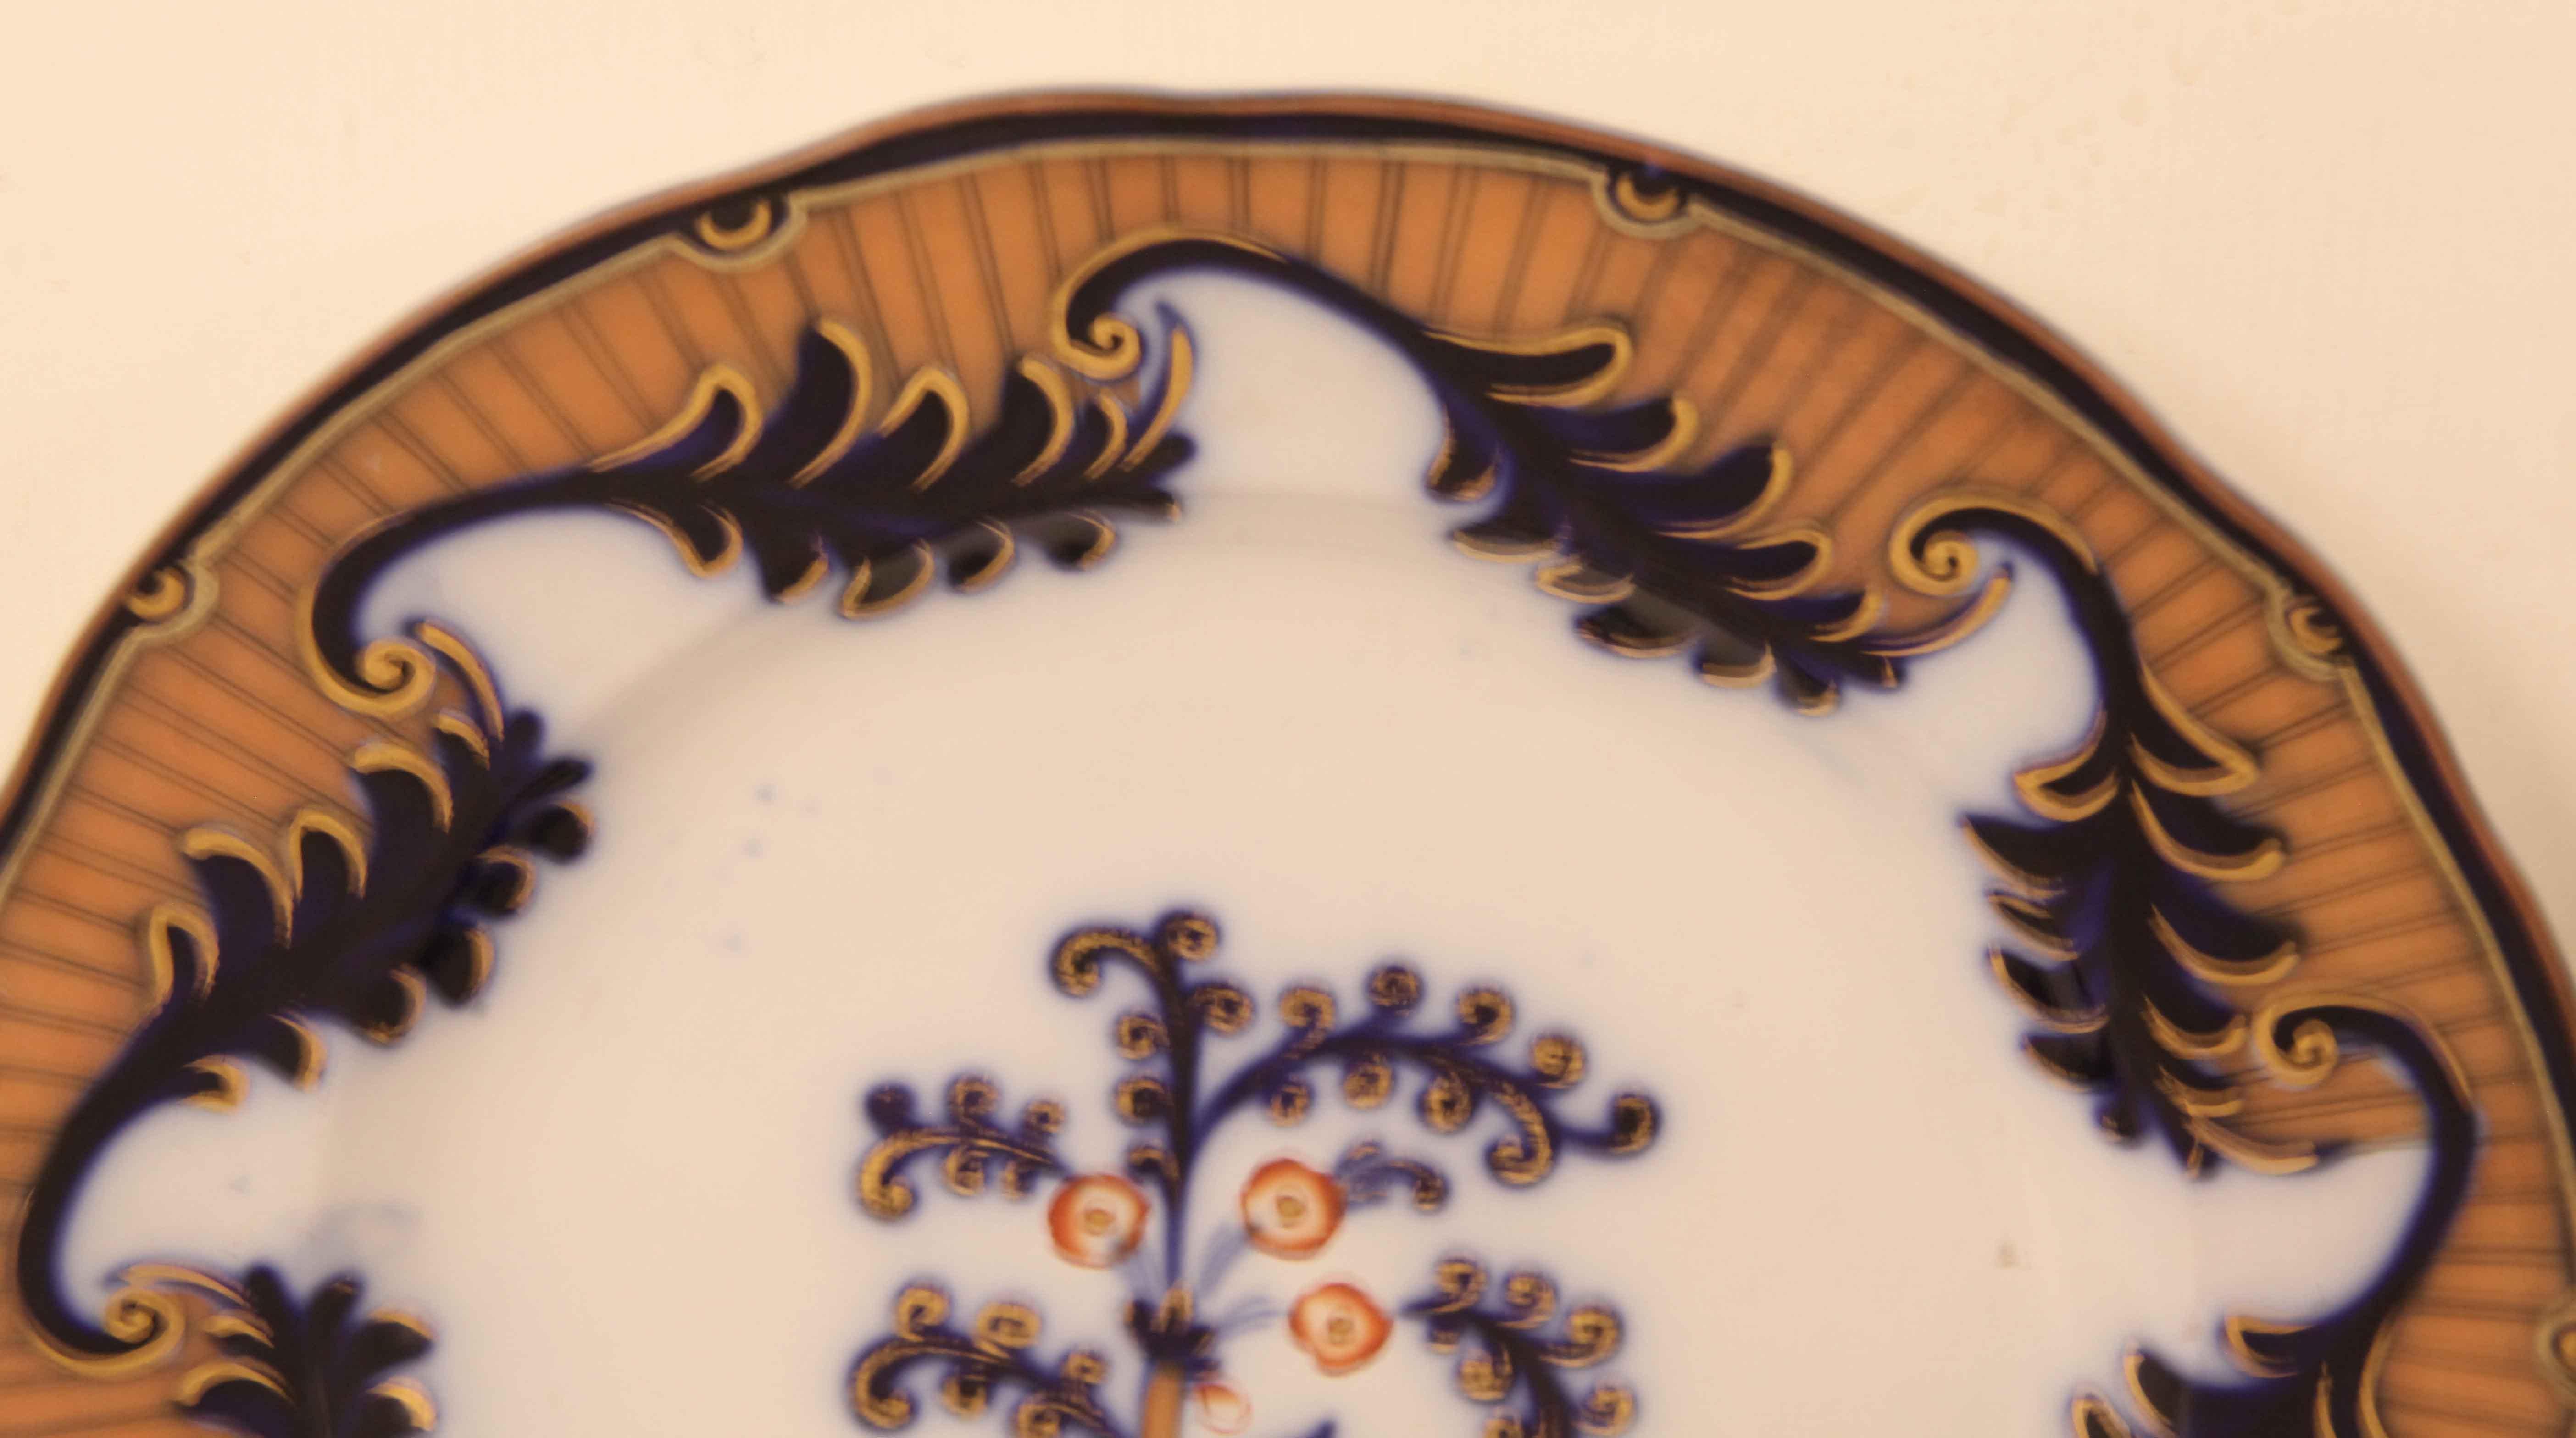 Pair of flow blue Staffordshire plates, the border features a repeating pattern of stylized leaves with gilt edges connected with volutes, this is inside a coral colored background with double straight pin lines around the perimeter.  The main body